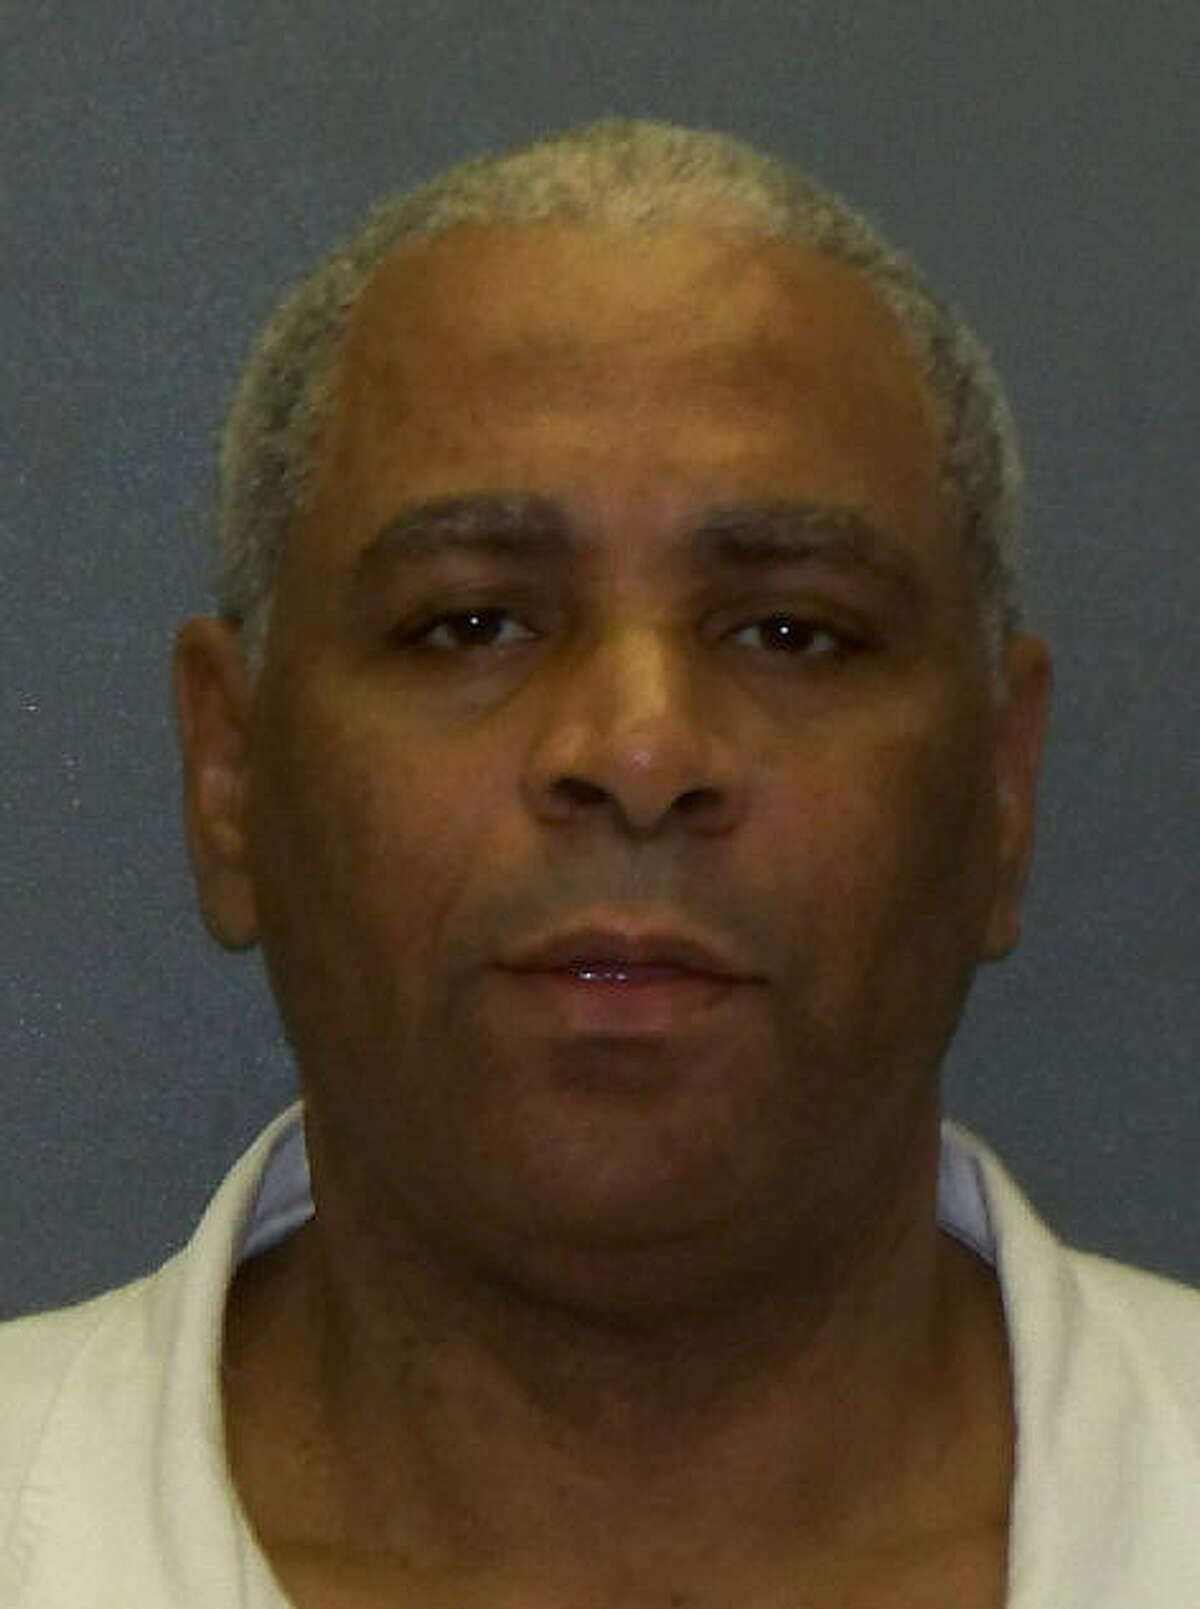 Willie Albert Coonce got life for a 1980 robbery slaying at a Houston grocery store. He got life but was released on parole in 2012. He is a codefendant of Bobby James Moore, whose case goes before the US Supreme Court Tuesday